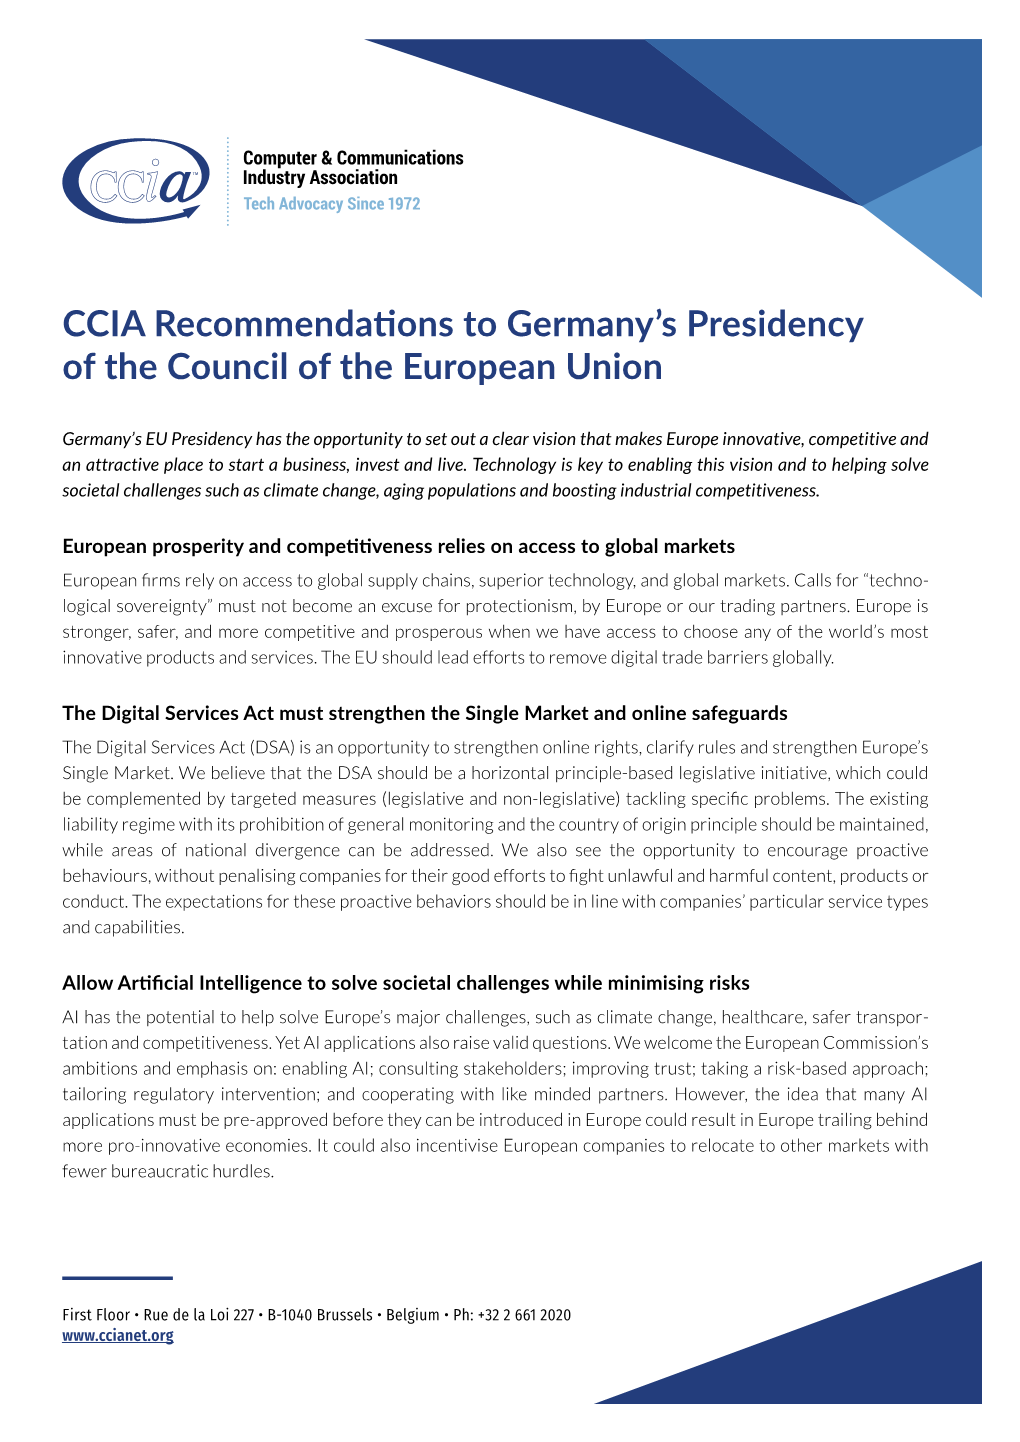 CCIA Recommendations to Germany's Presidency of the Council of The